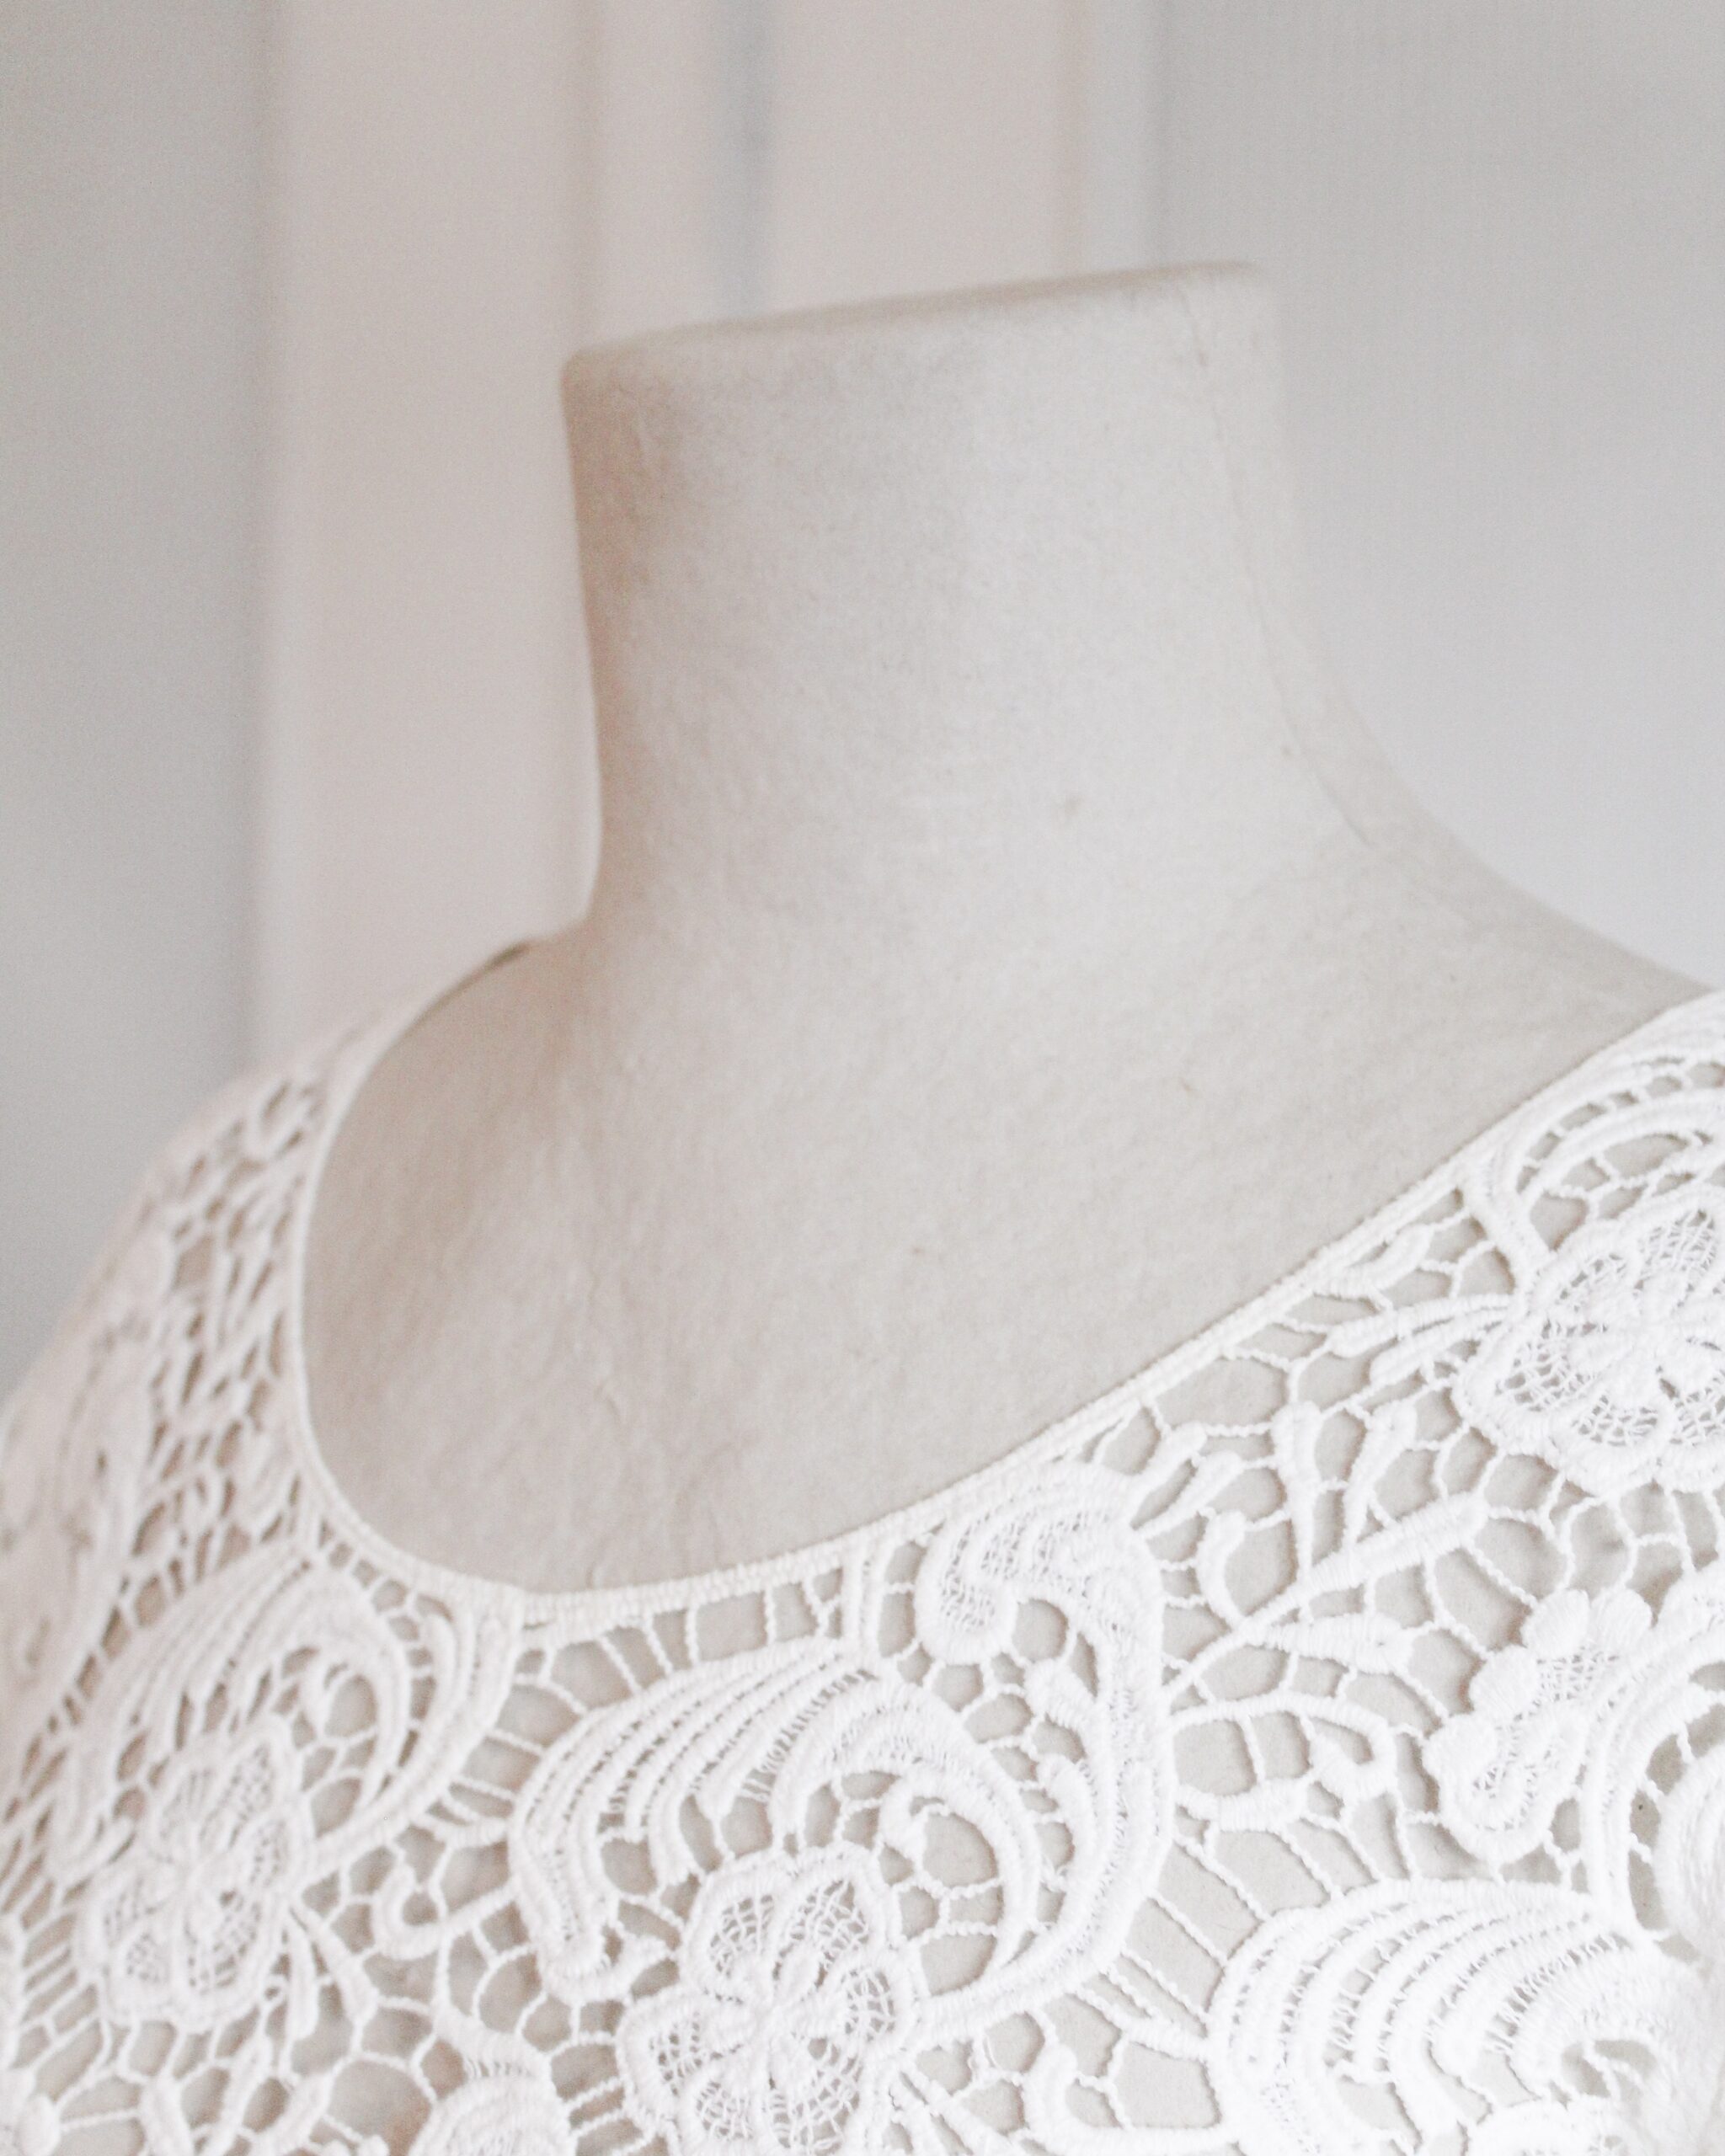 White floral lace shirt in a mannequin